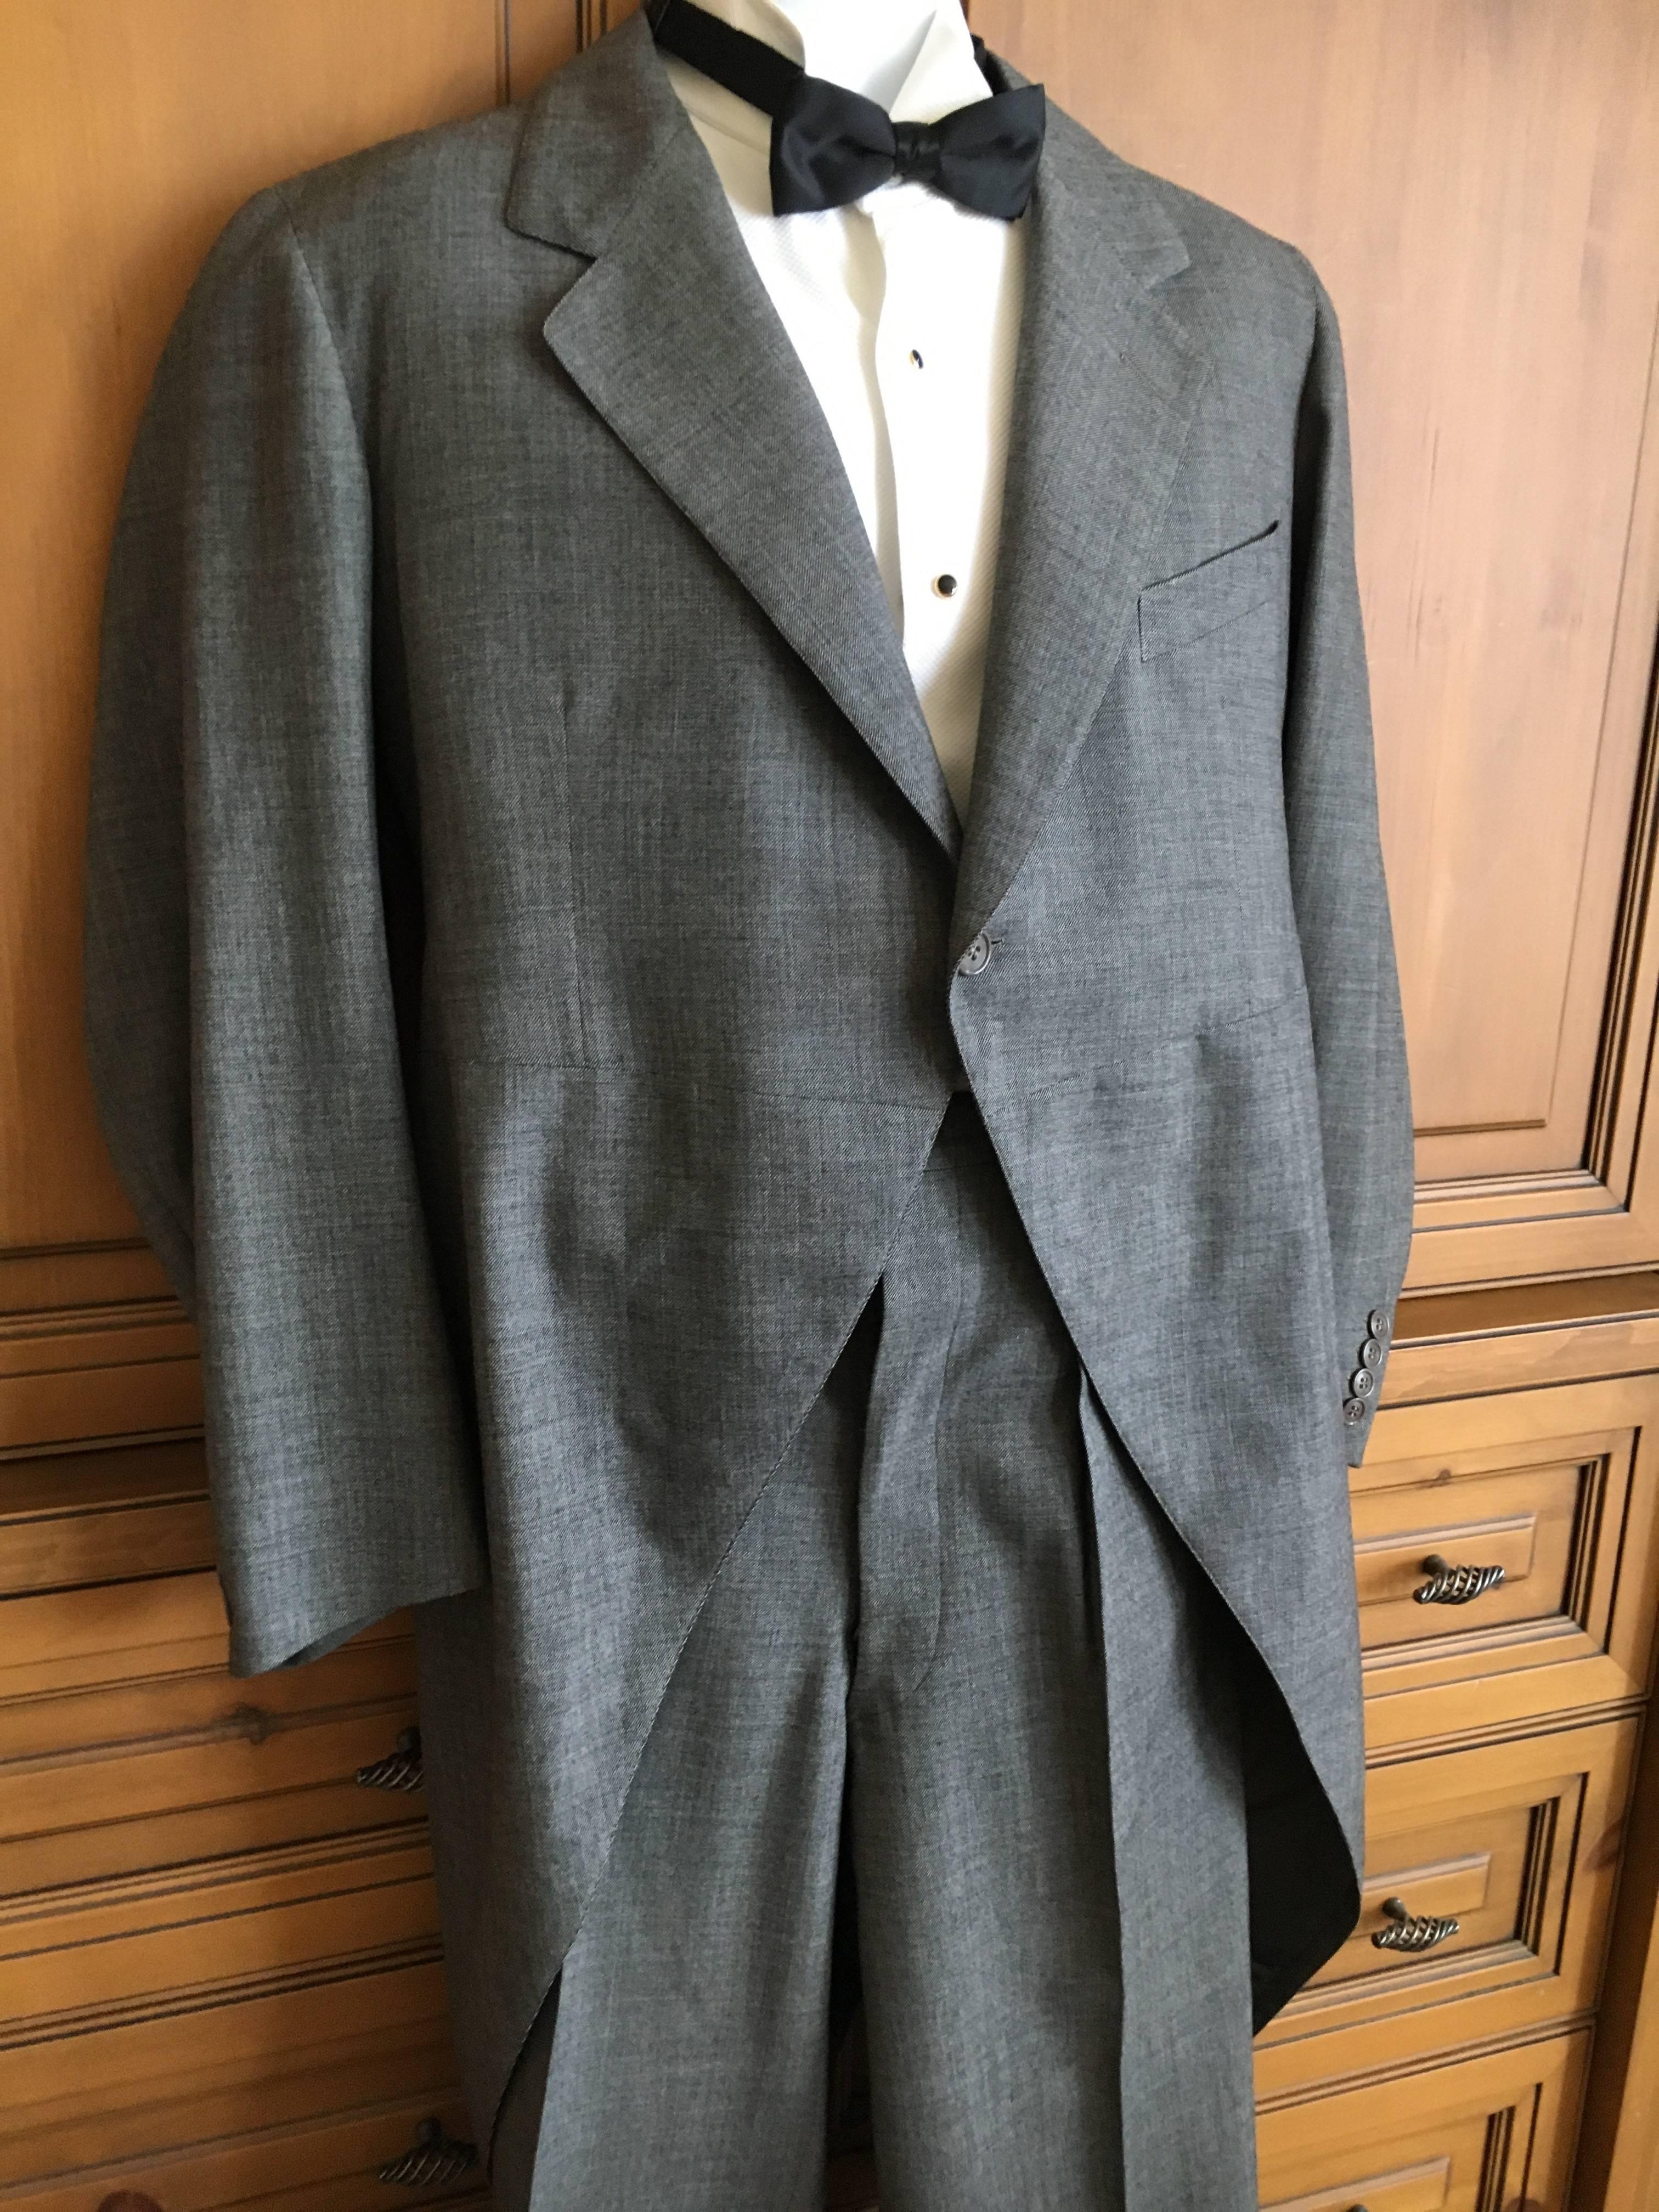 1941 Men's Gray Formal Cutaway Tailcoat Suit Dunne & Co. For Sale 3